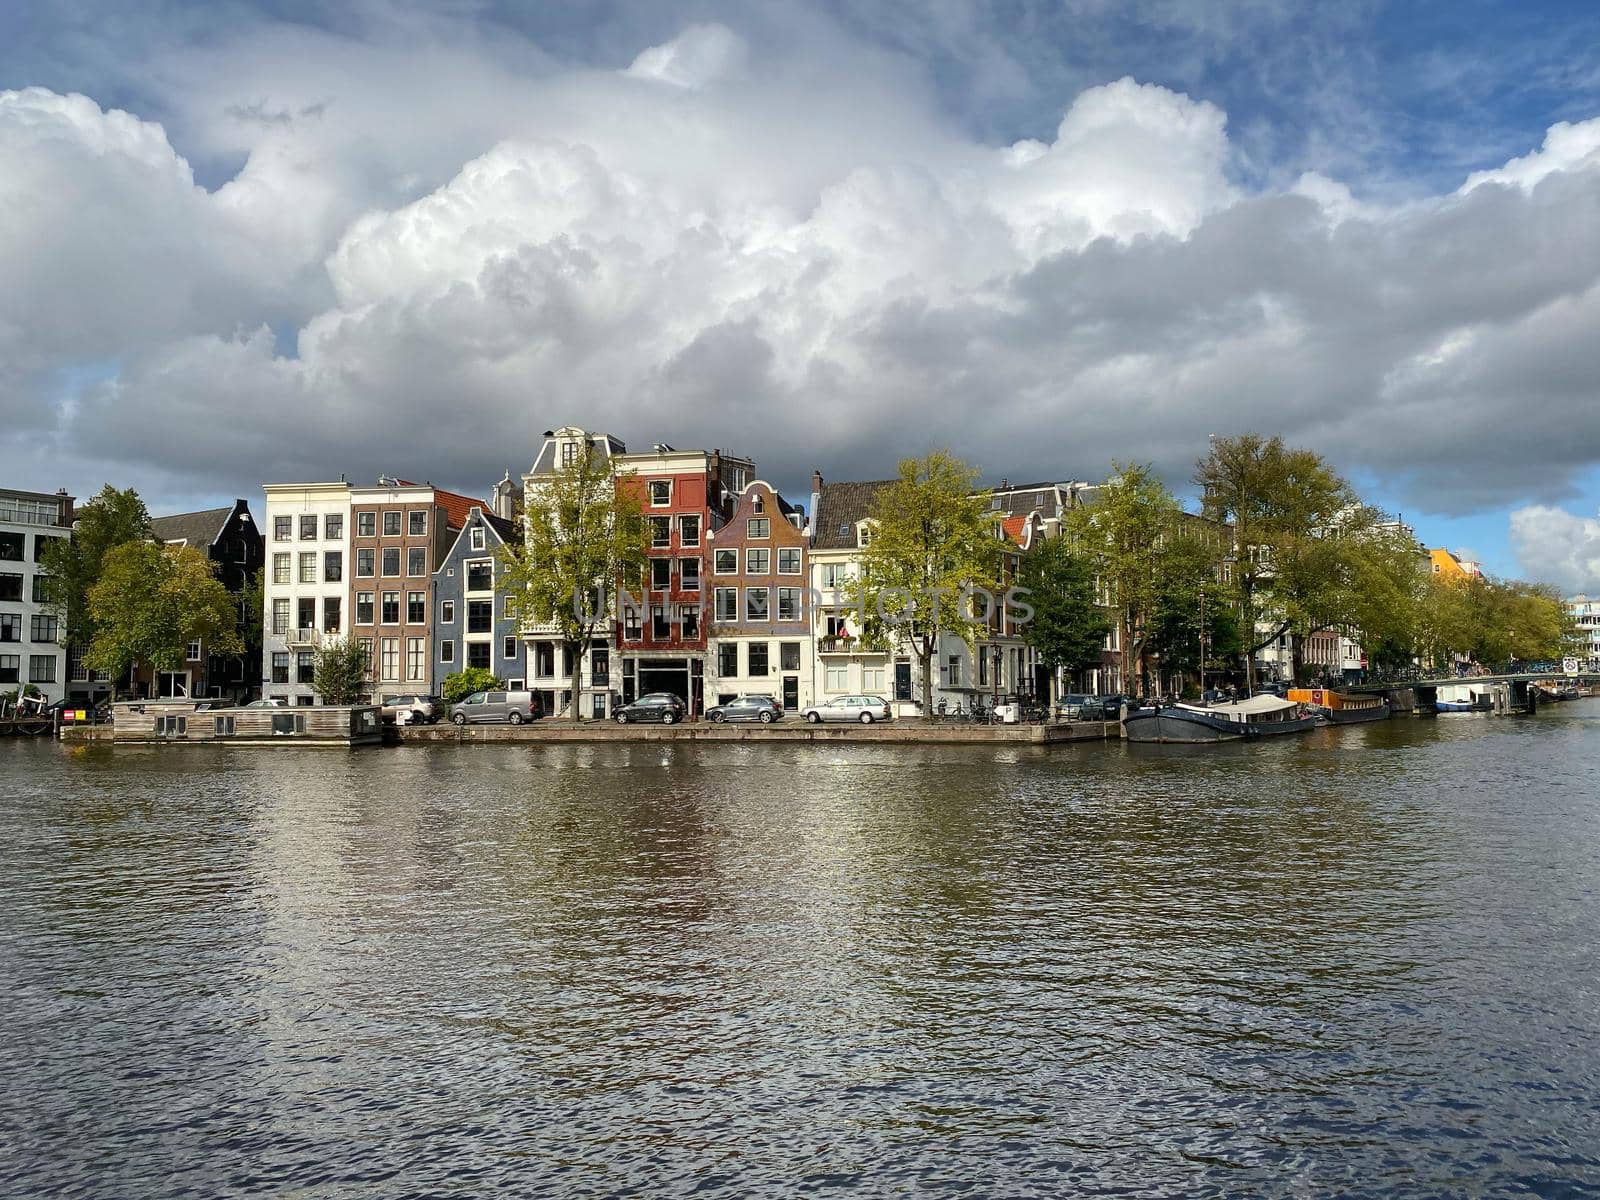 Amsterdam, Netherlands - October 2,2019: Amsterdam canal with typical dutch houses and houseboats, boats in the evening with beautiful water reflections, Holland, Netherlands.